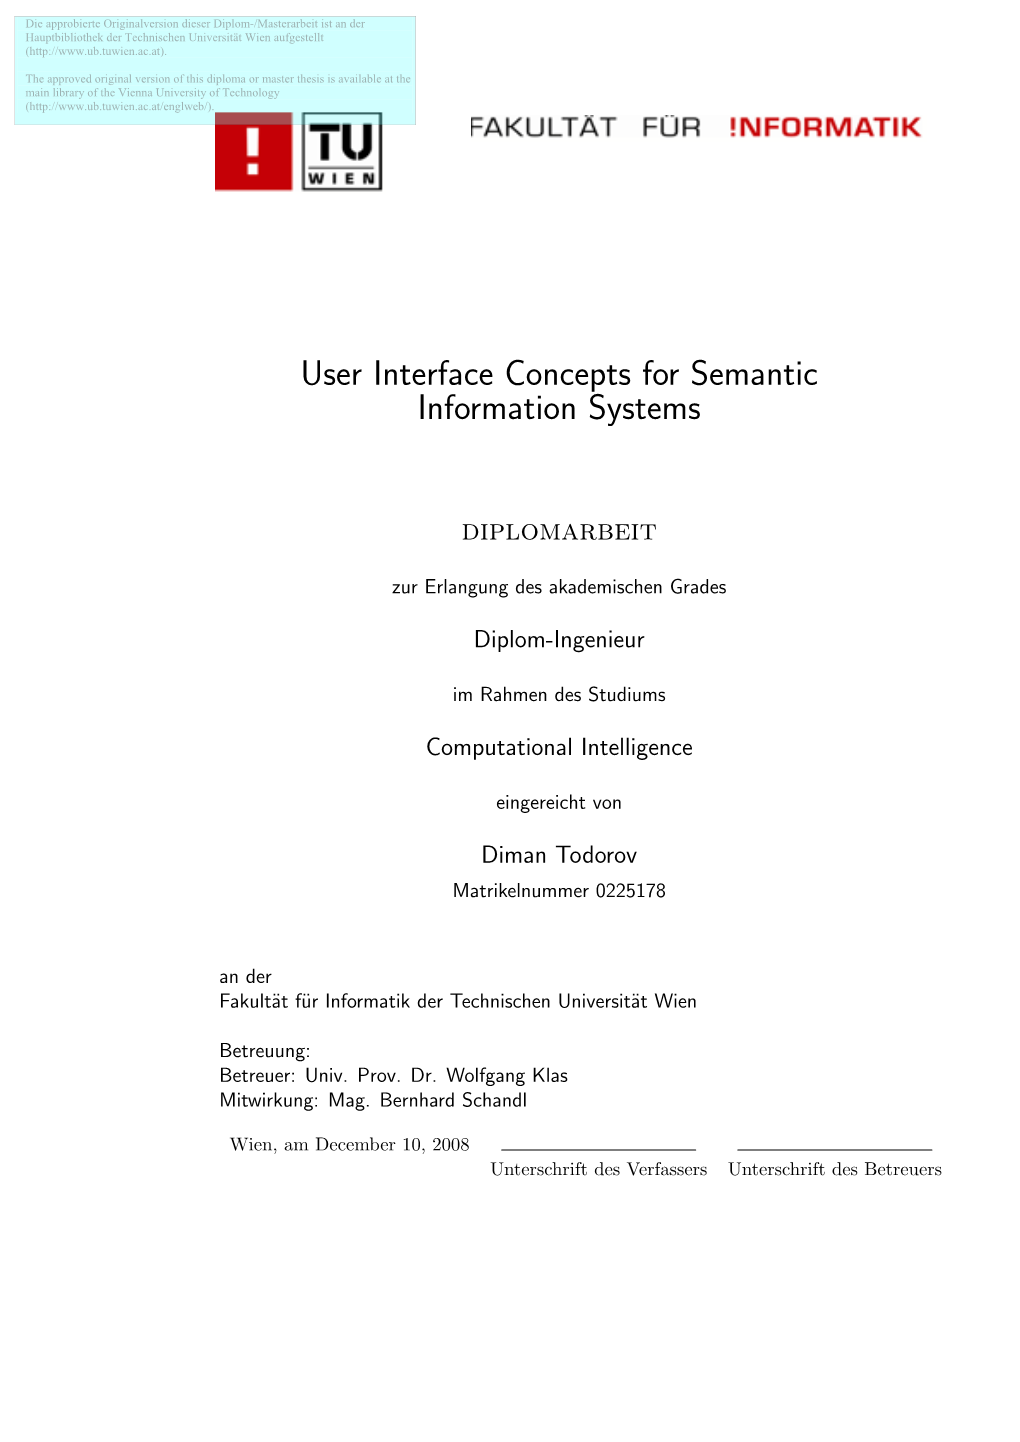 User Interface Concepts for Semantic Information Systems